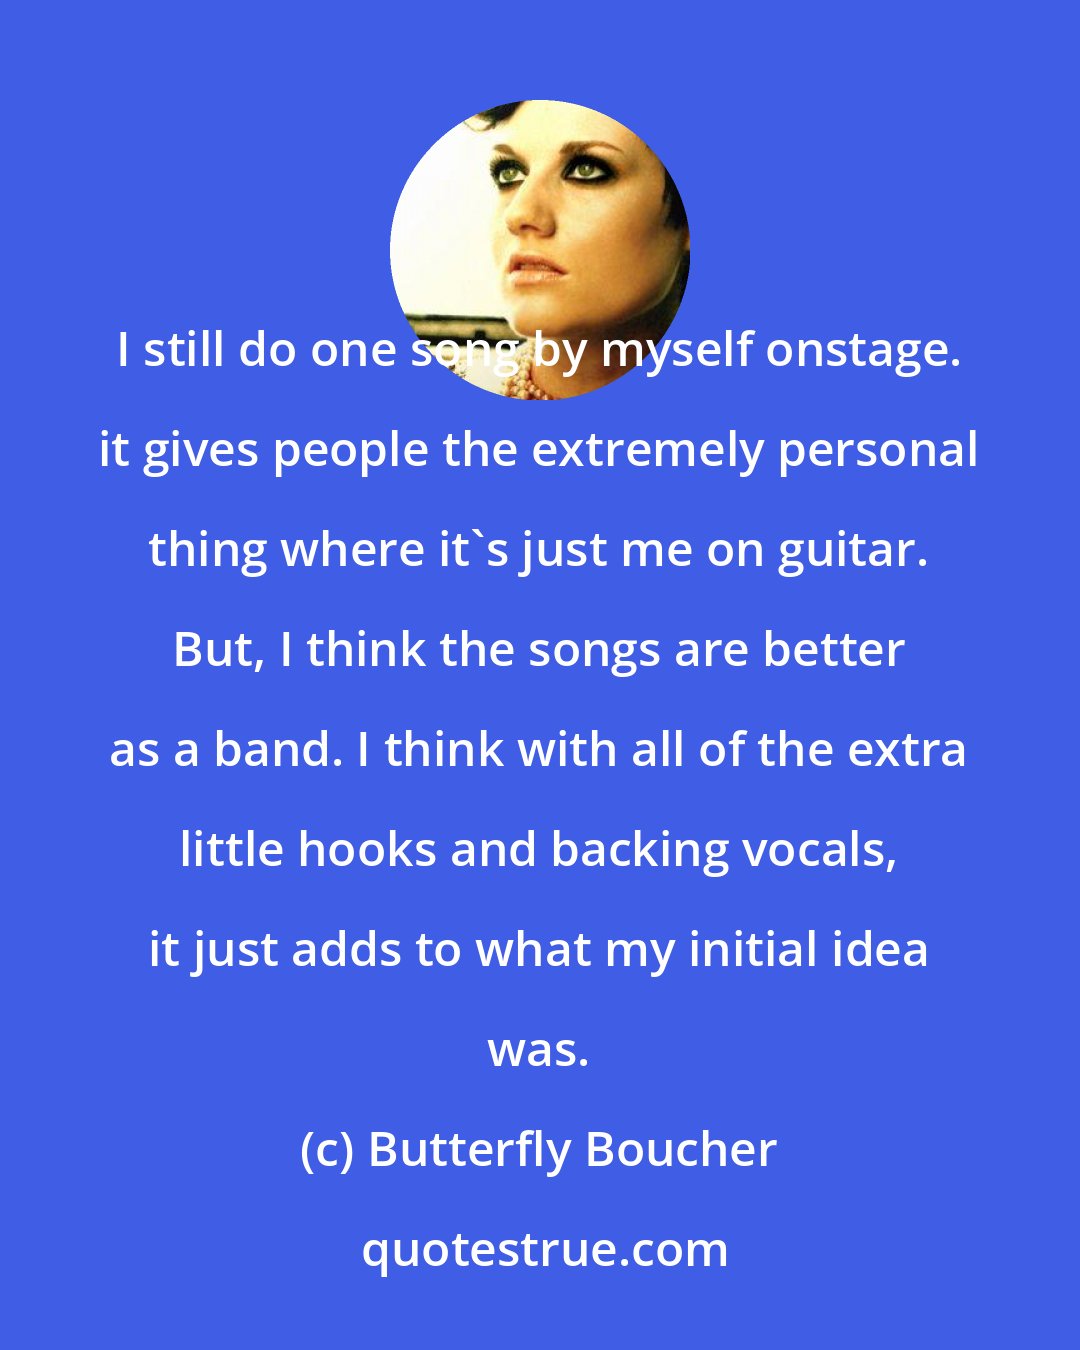 Butterfly Boucher: I still do one song by myself onstage. it gives people the extremely personal thing where it's just me on guitar. But, I think the songs are better as a band. I think with all of the extra little hooks and backing vocals, it just adds to what my initial idea was.